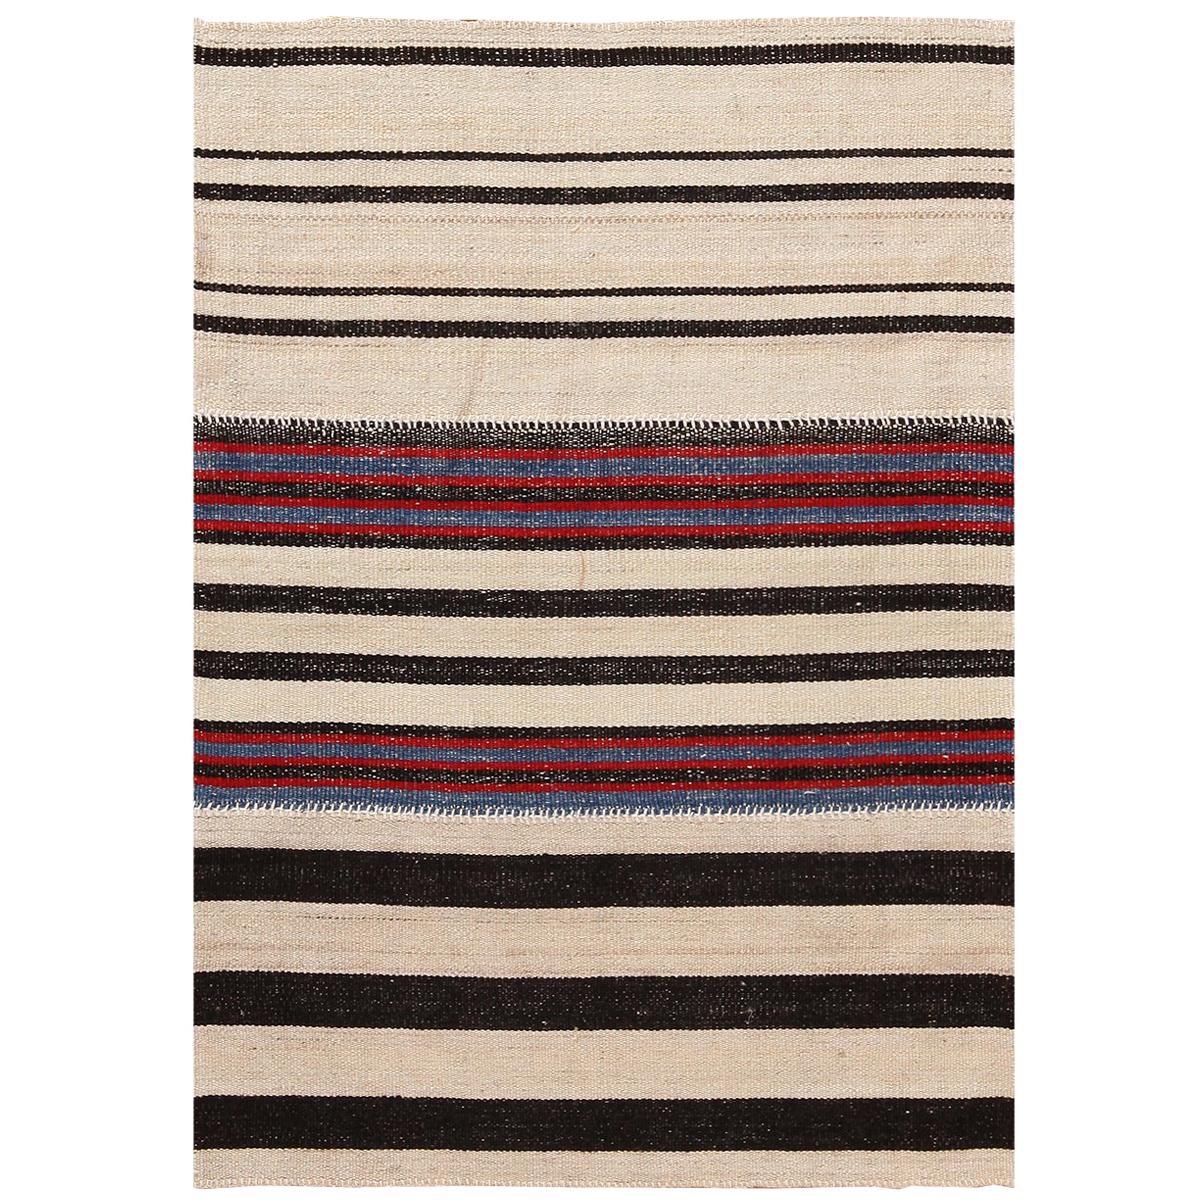 Modern Persian Flat-Weave Rug. Size: 3 ft. 8 in x 5 ft. 2 in